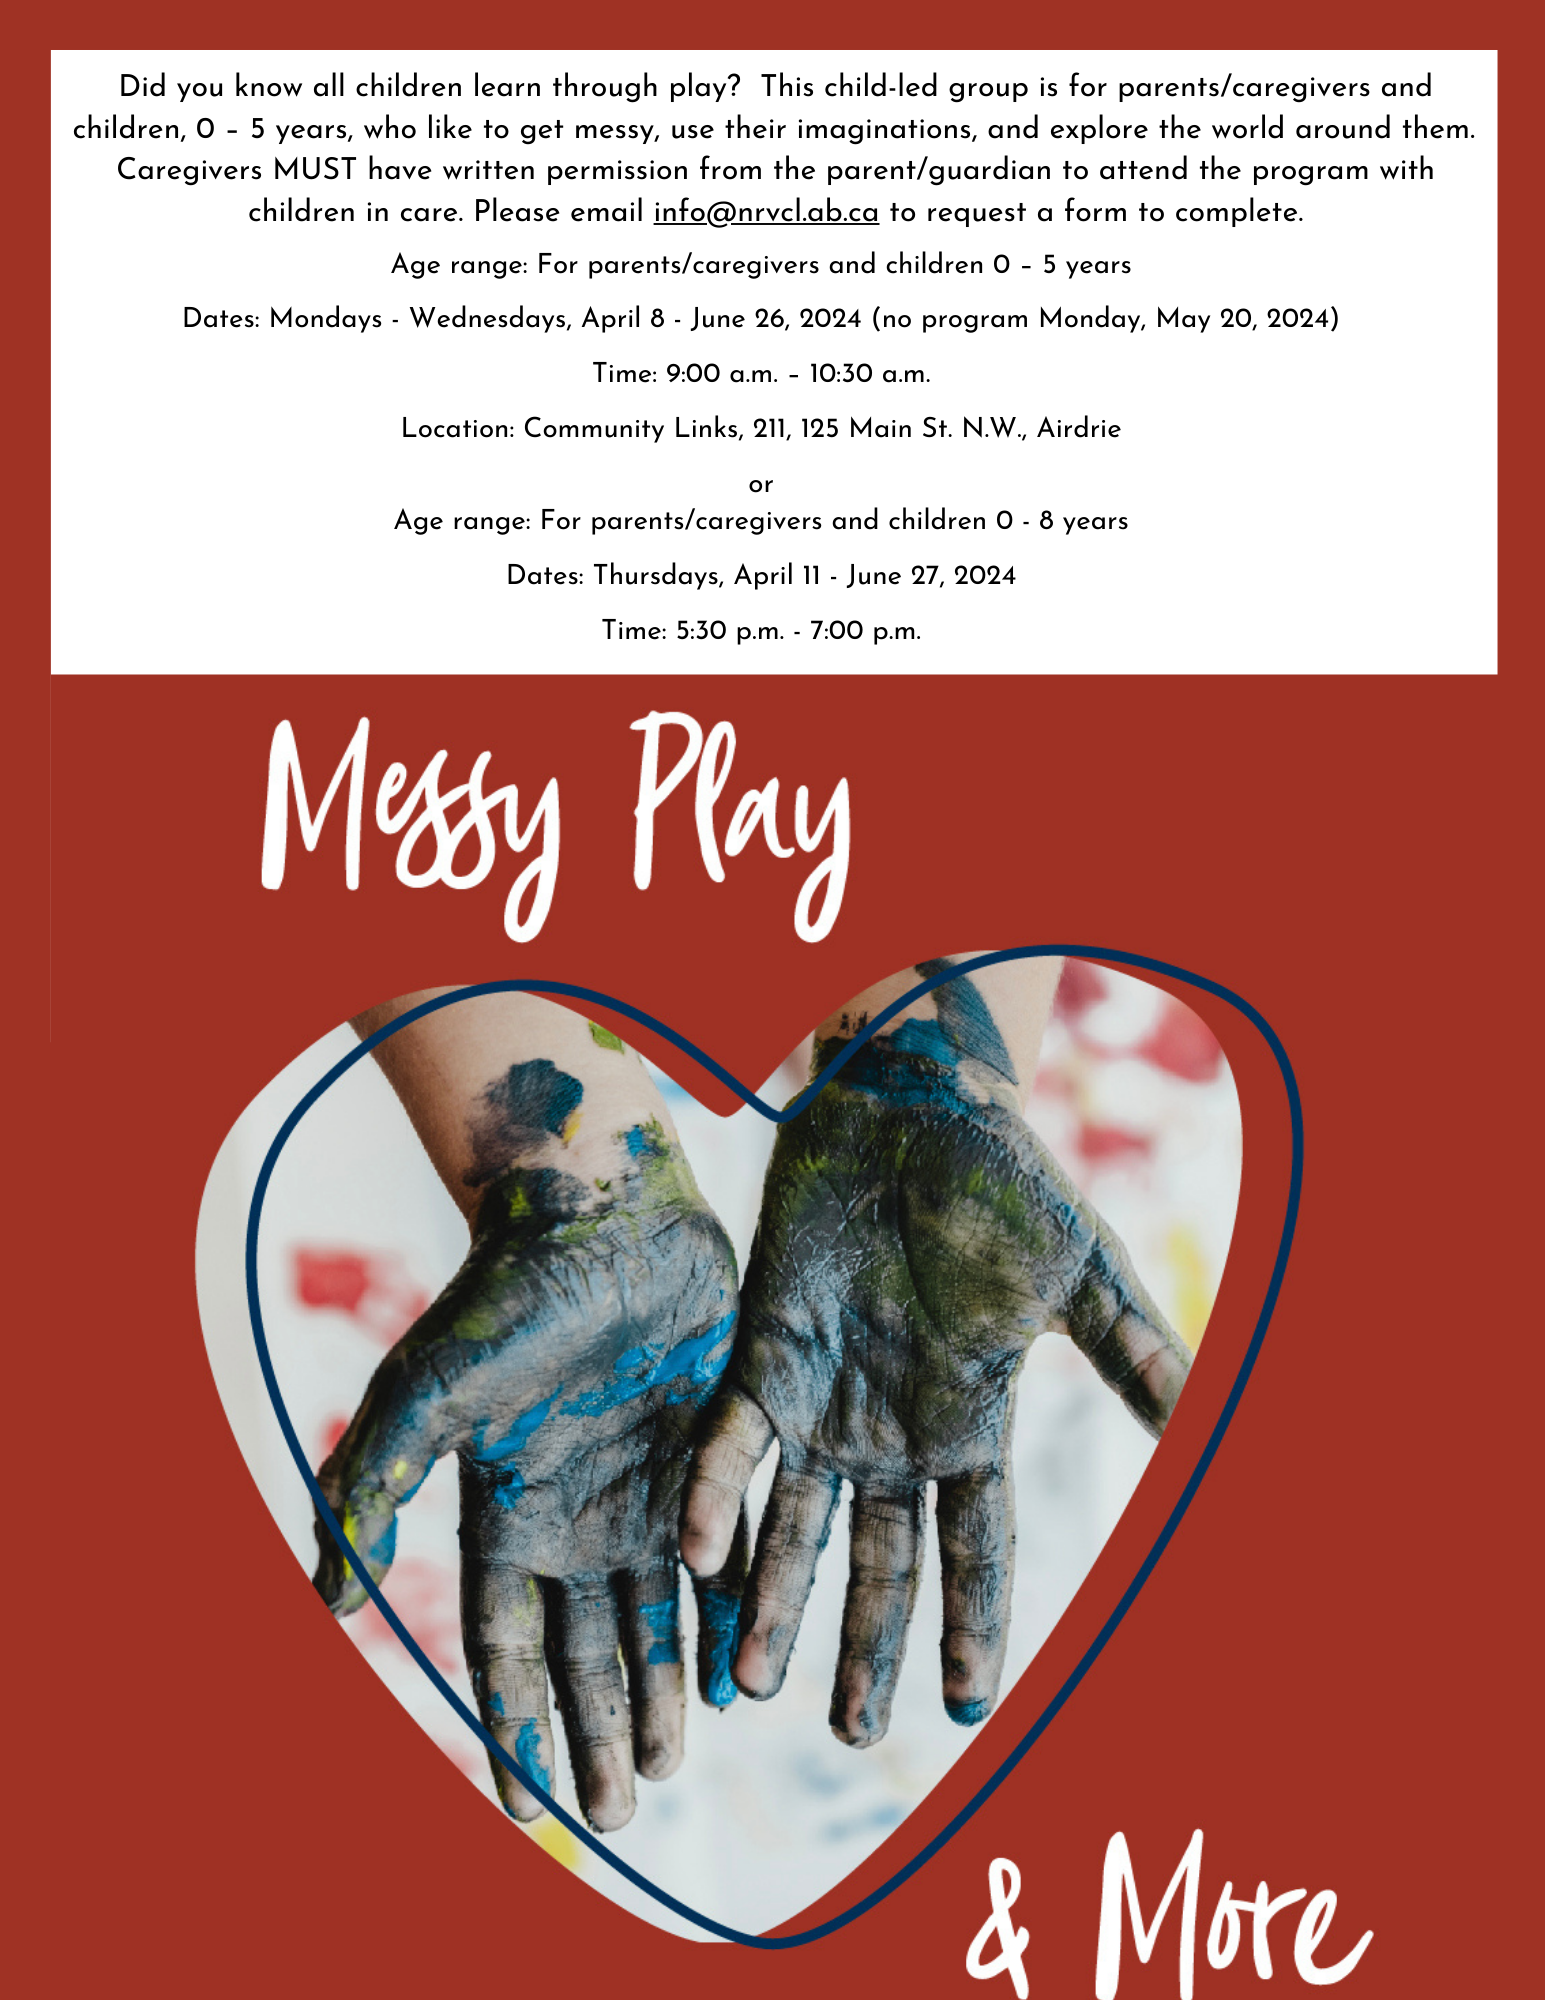 Community Links Messy Play & More Airdrie April-June 2024